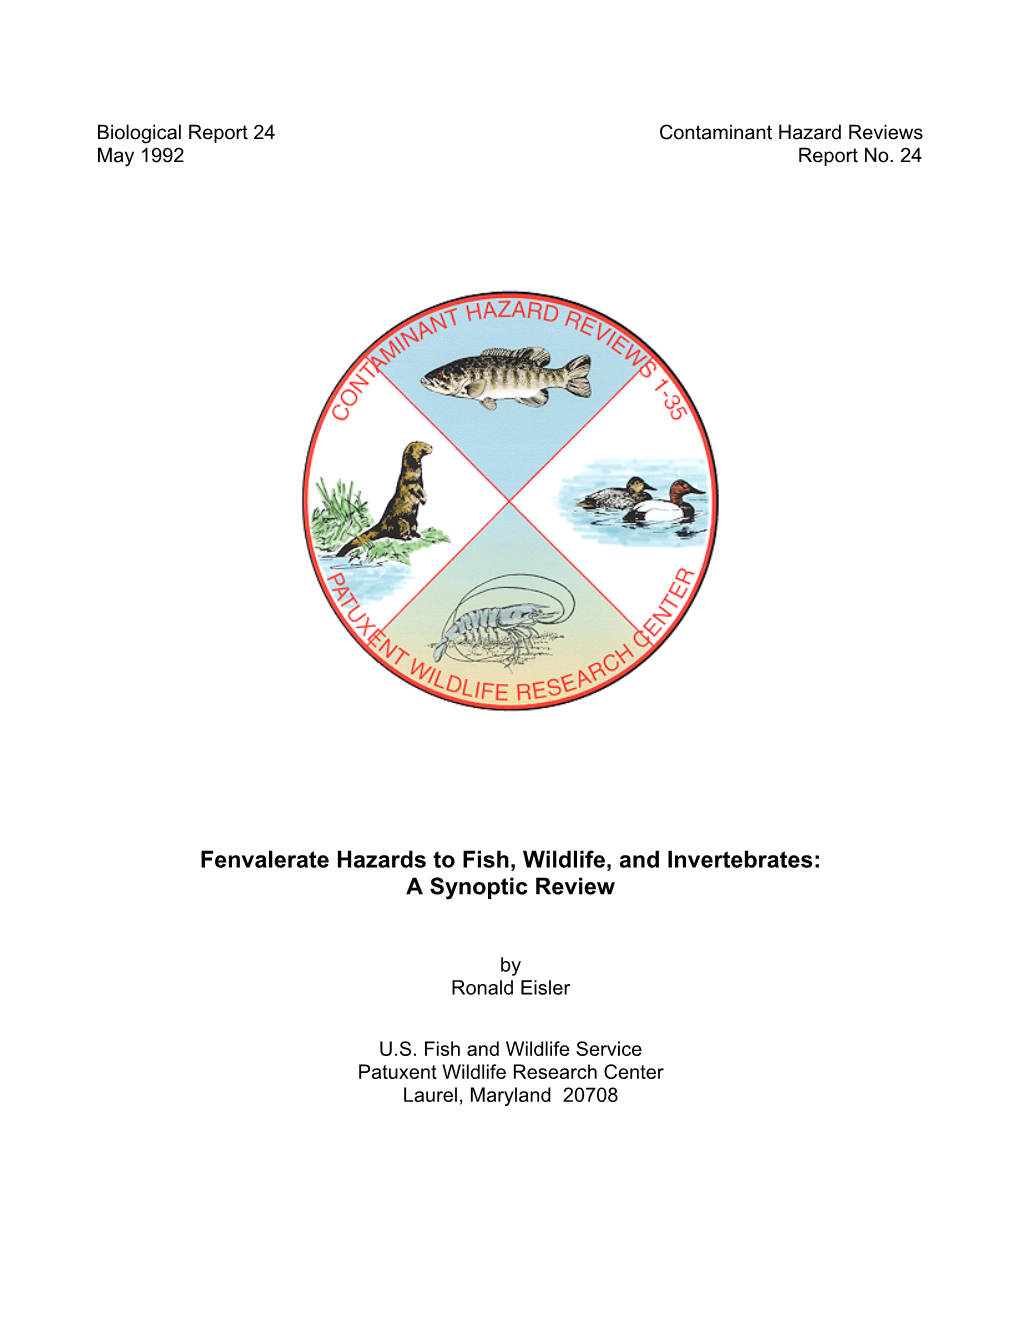 Fenvalerate Hazards to Fish, Wildlife, and Invertebrates: a Synoptic Review